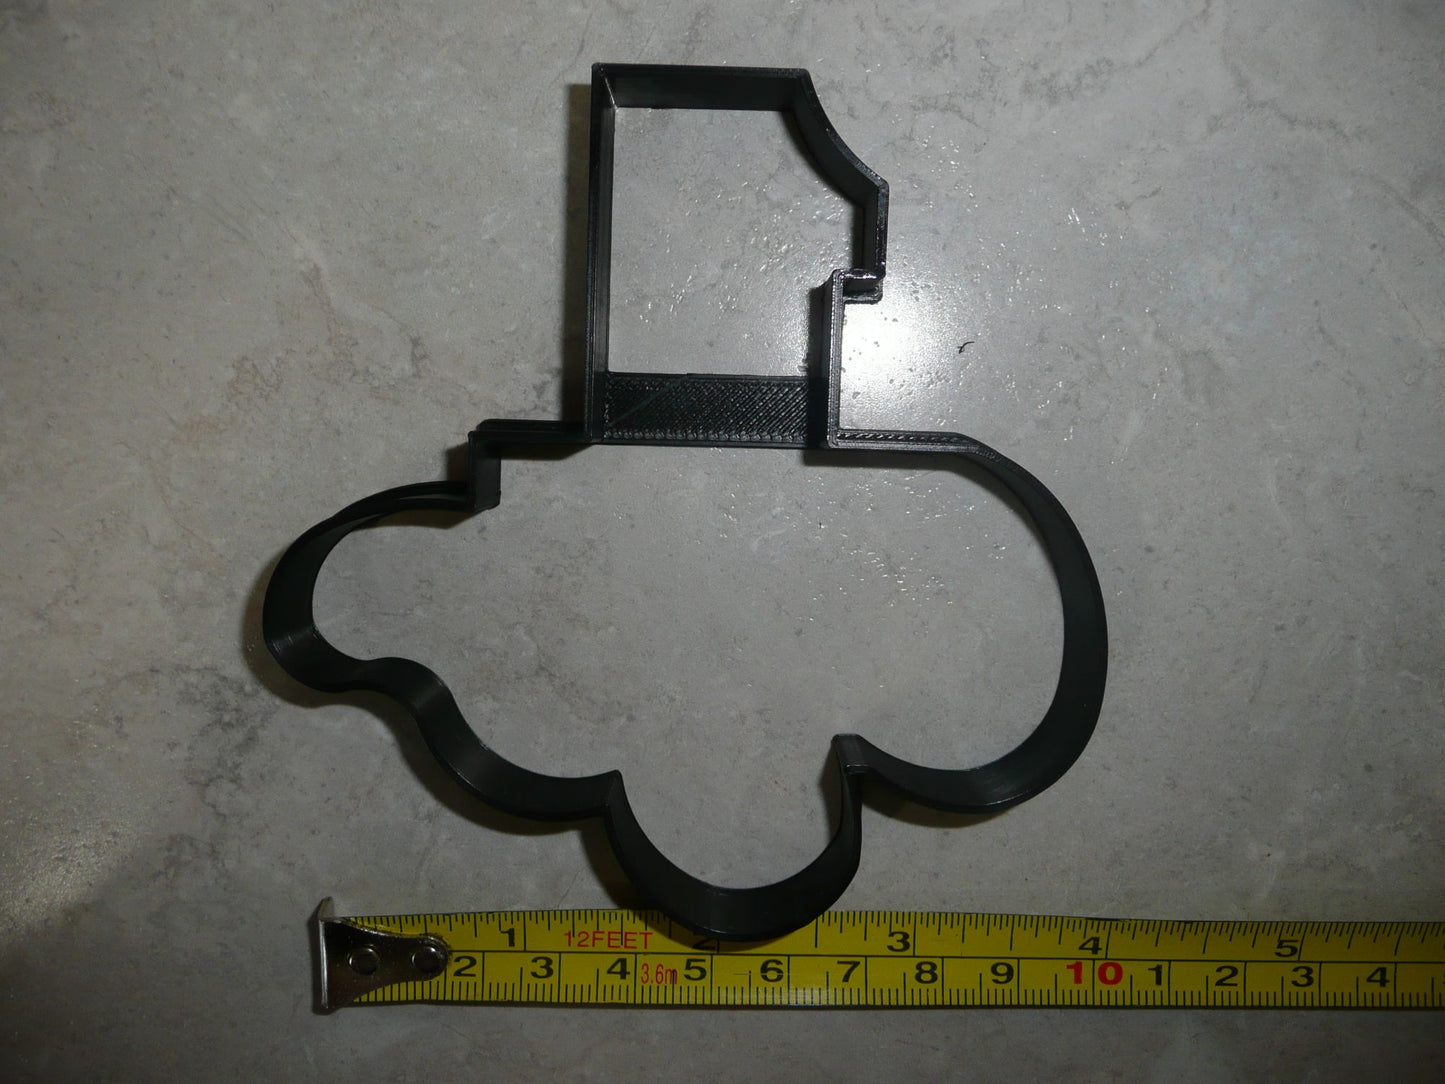 Number One 1 Outline Fancy Word Birthday Anniversary Cookie Cutter USA PR3001